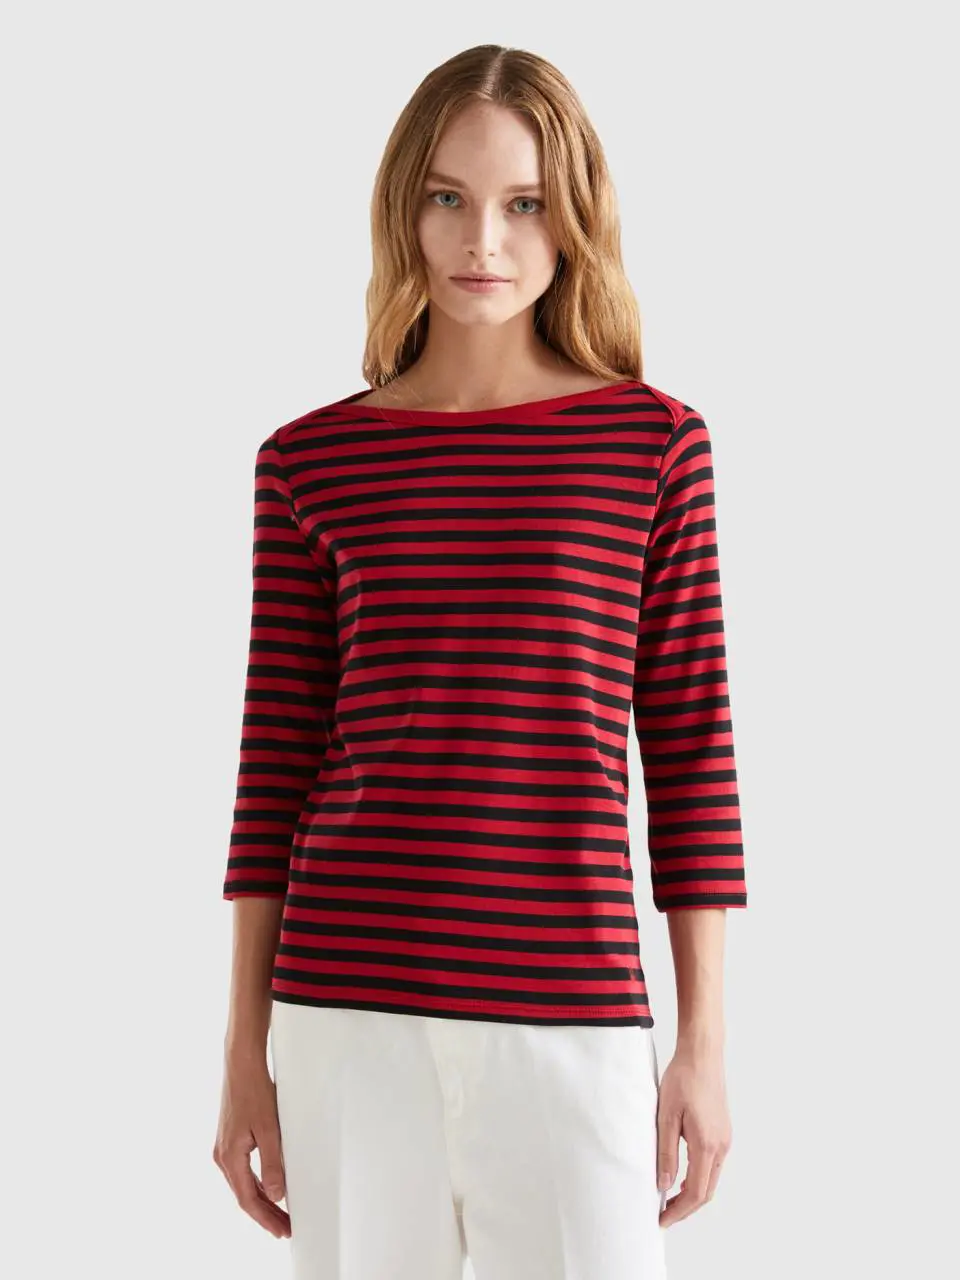 Benetton striped 3/4 sleeve t-shirt in 100% cotton. 1